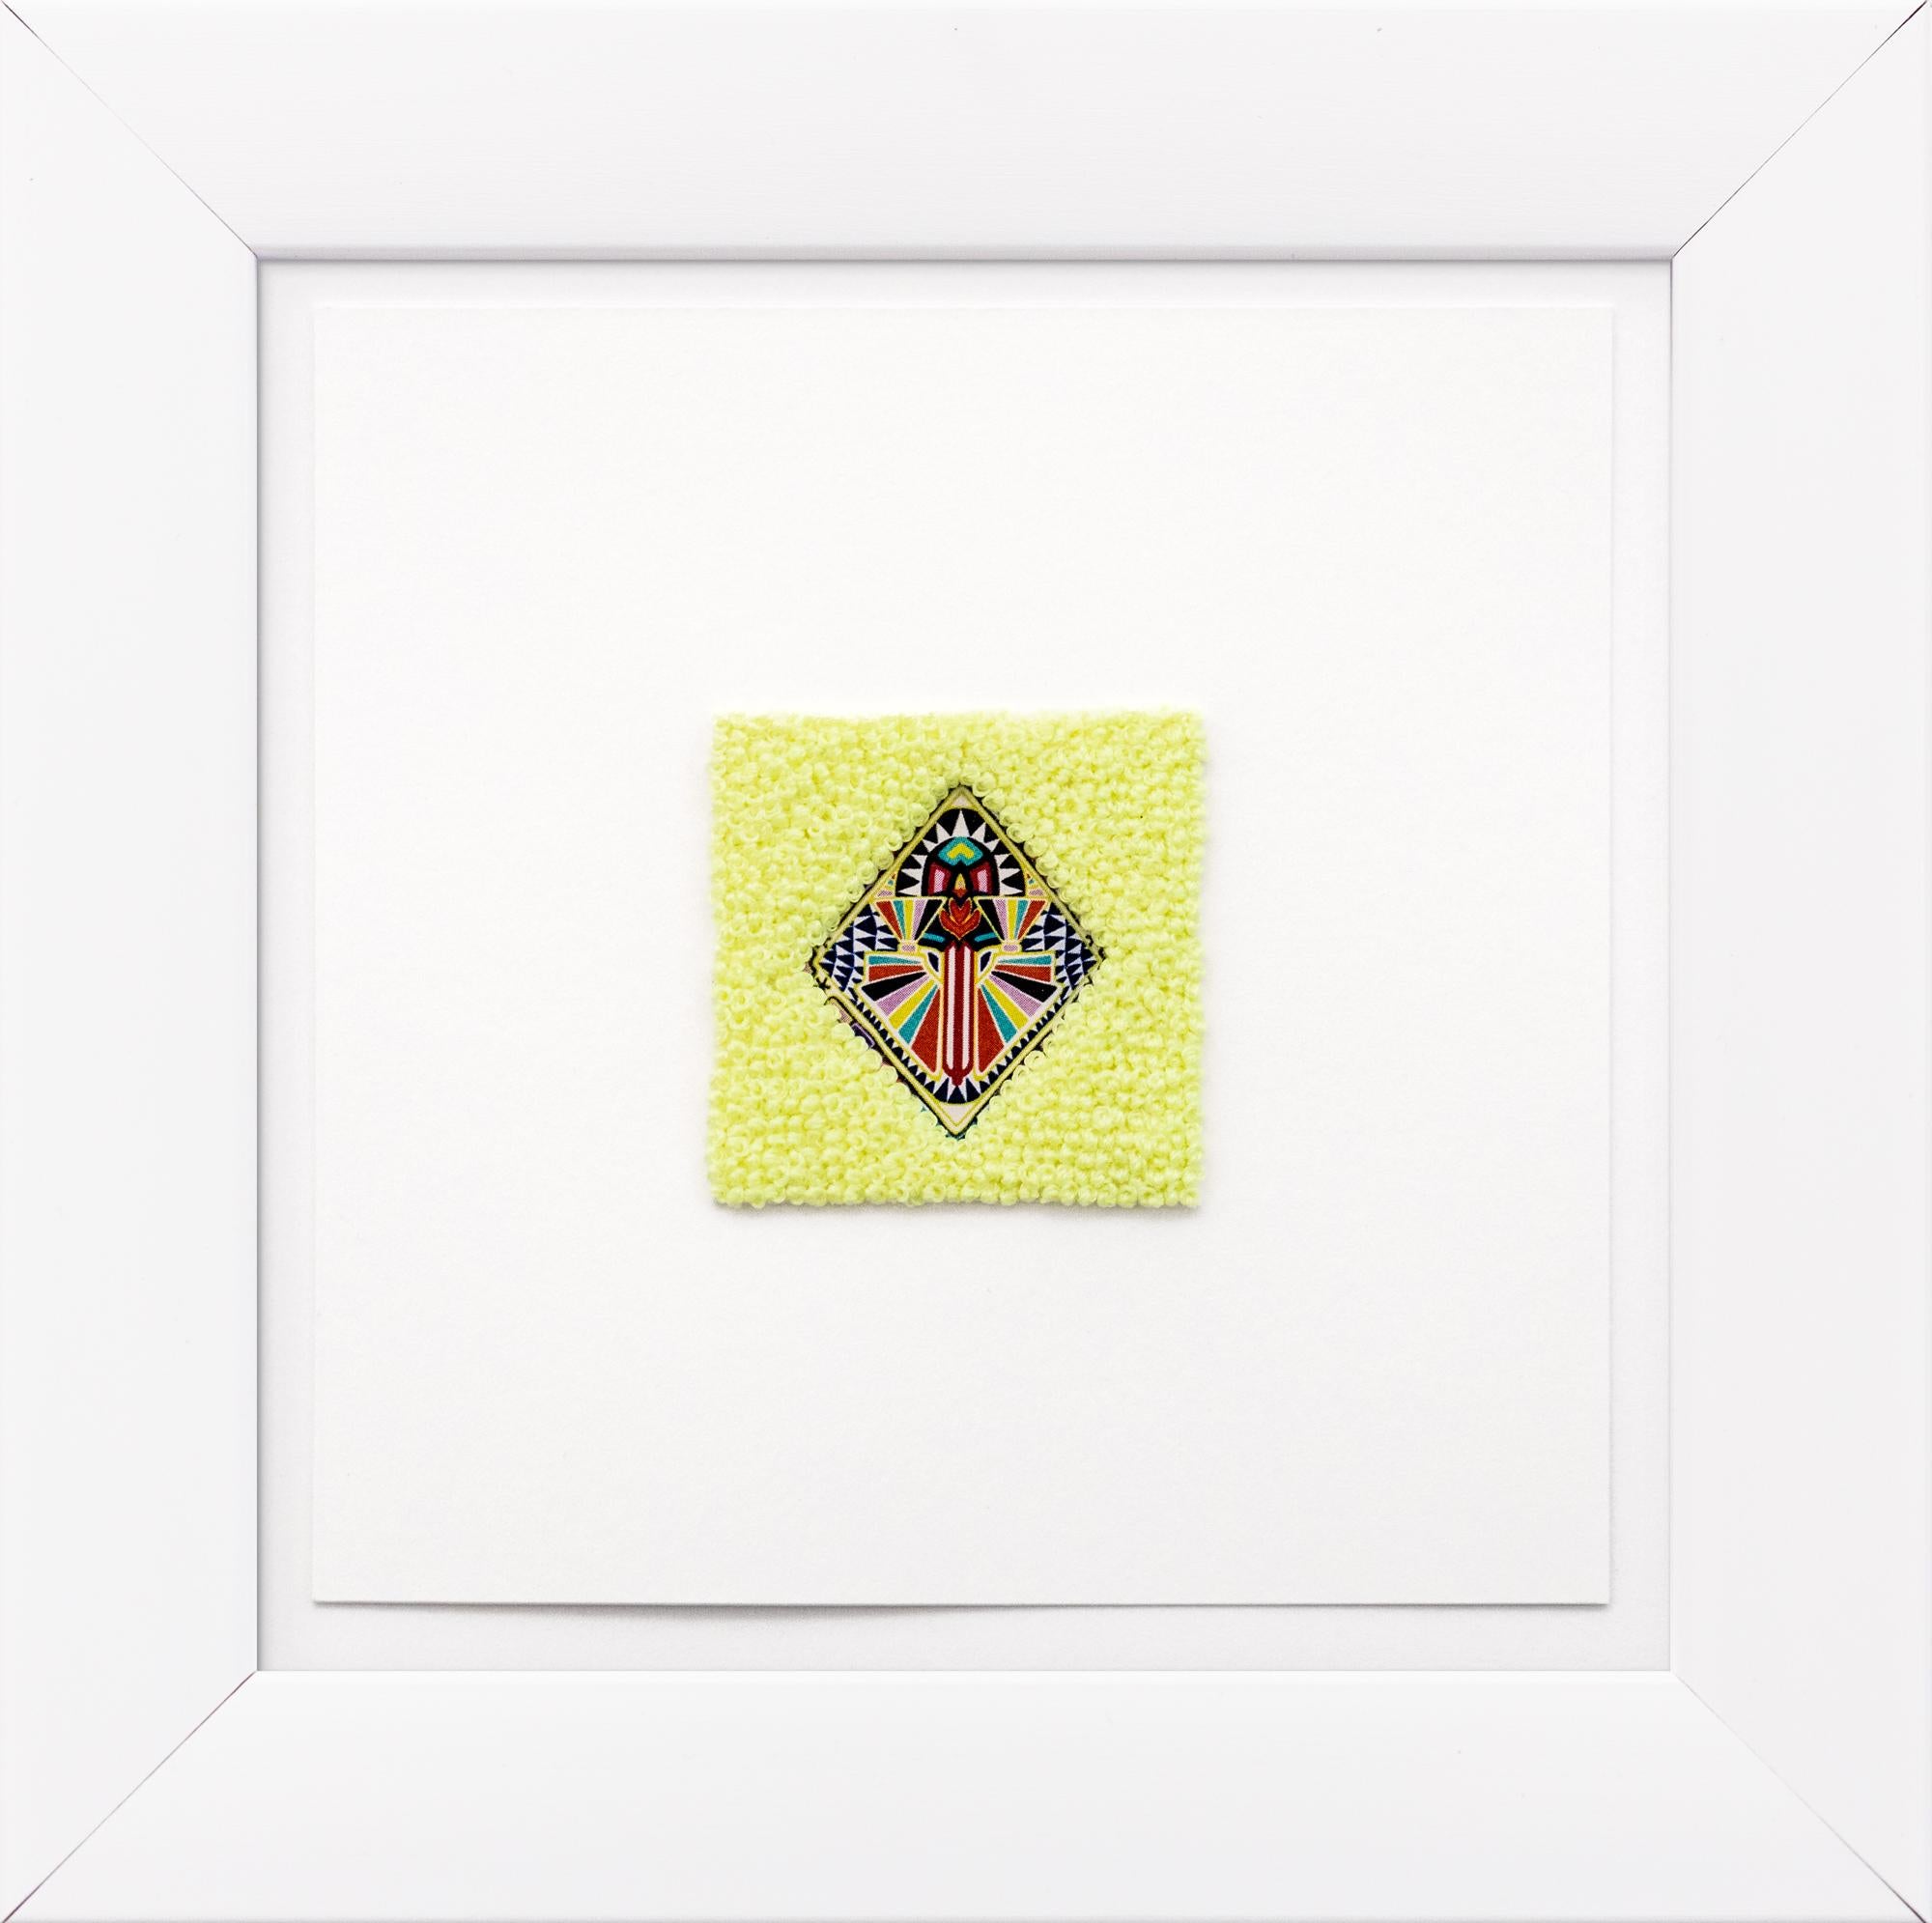 "Emblem" paper collage, hand-embroidery, neon, geometric pattern, thread